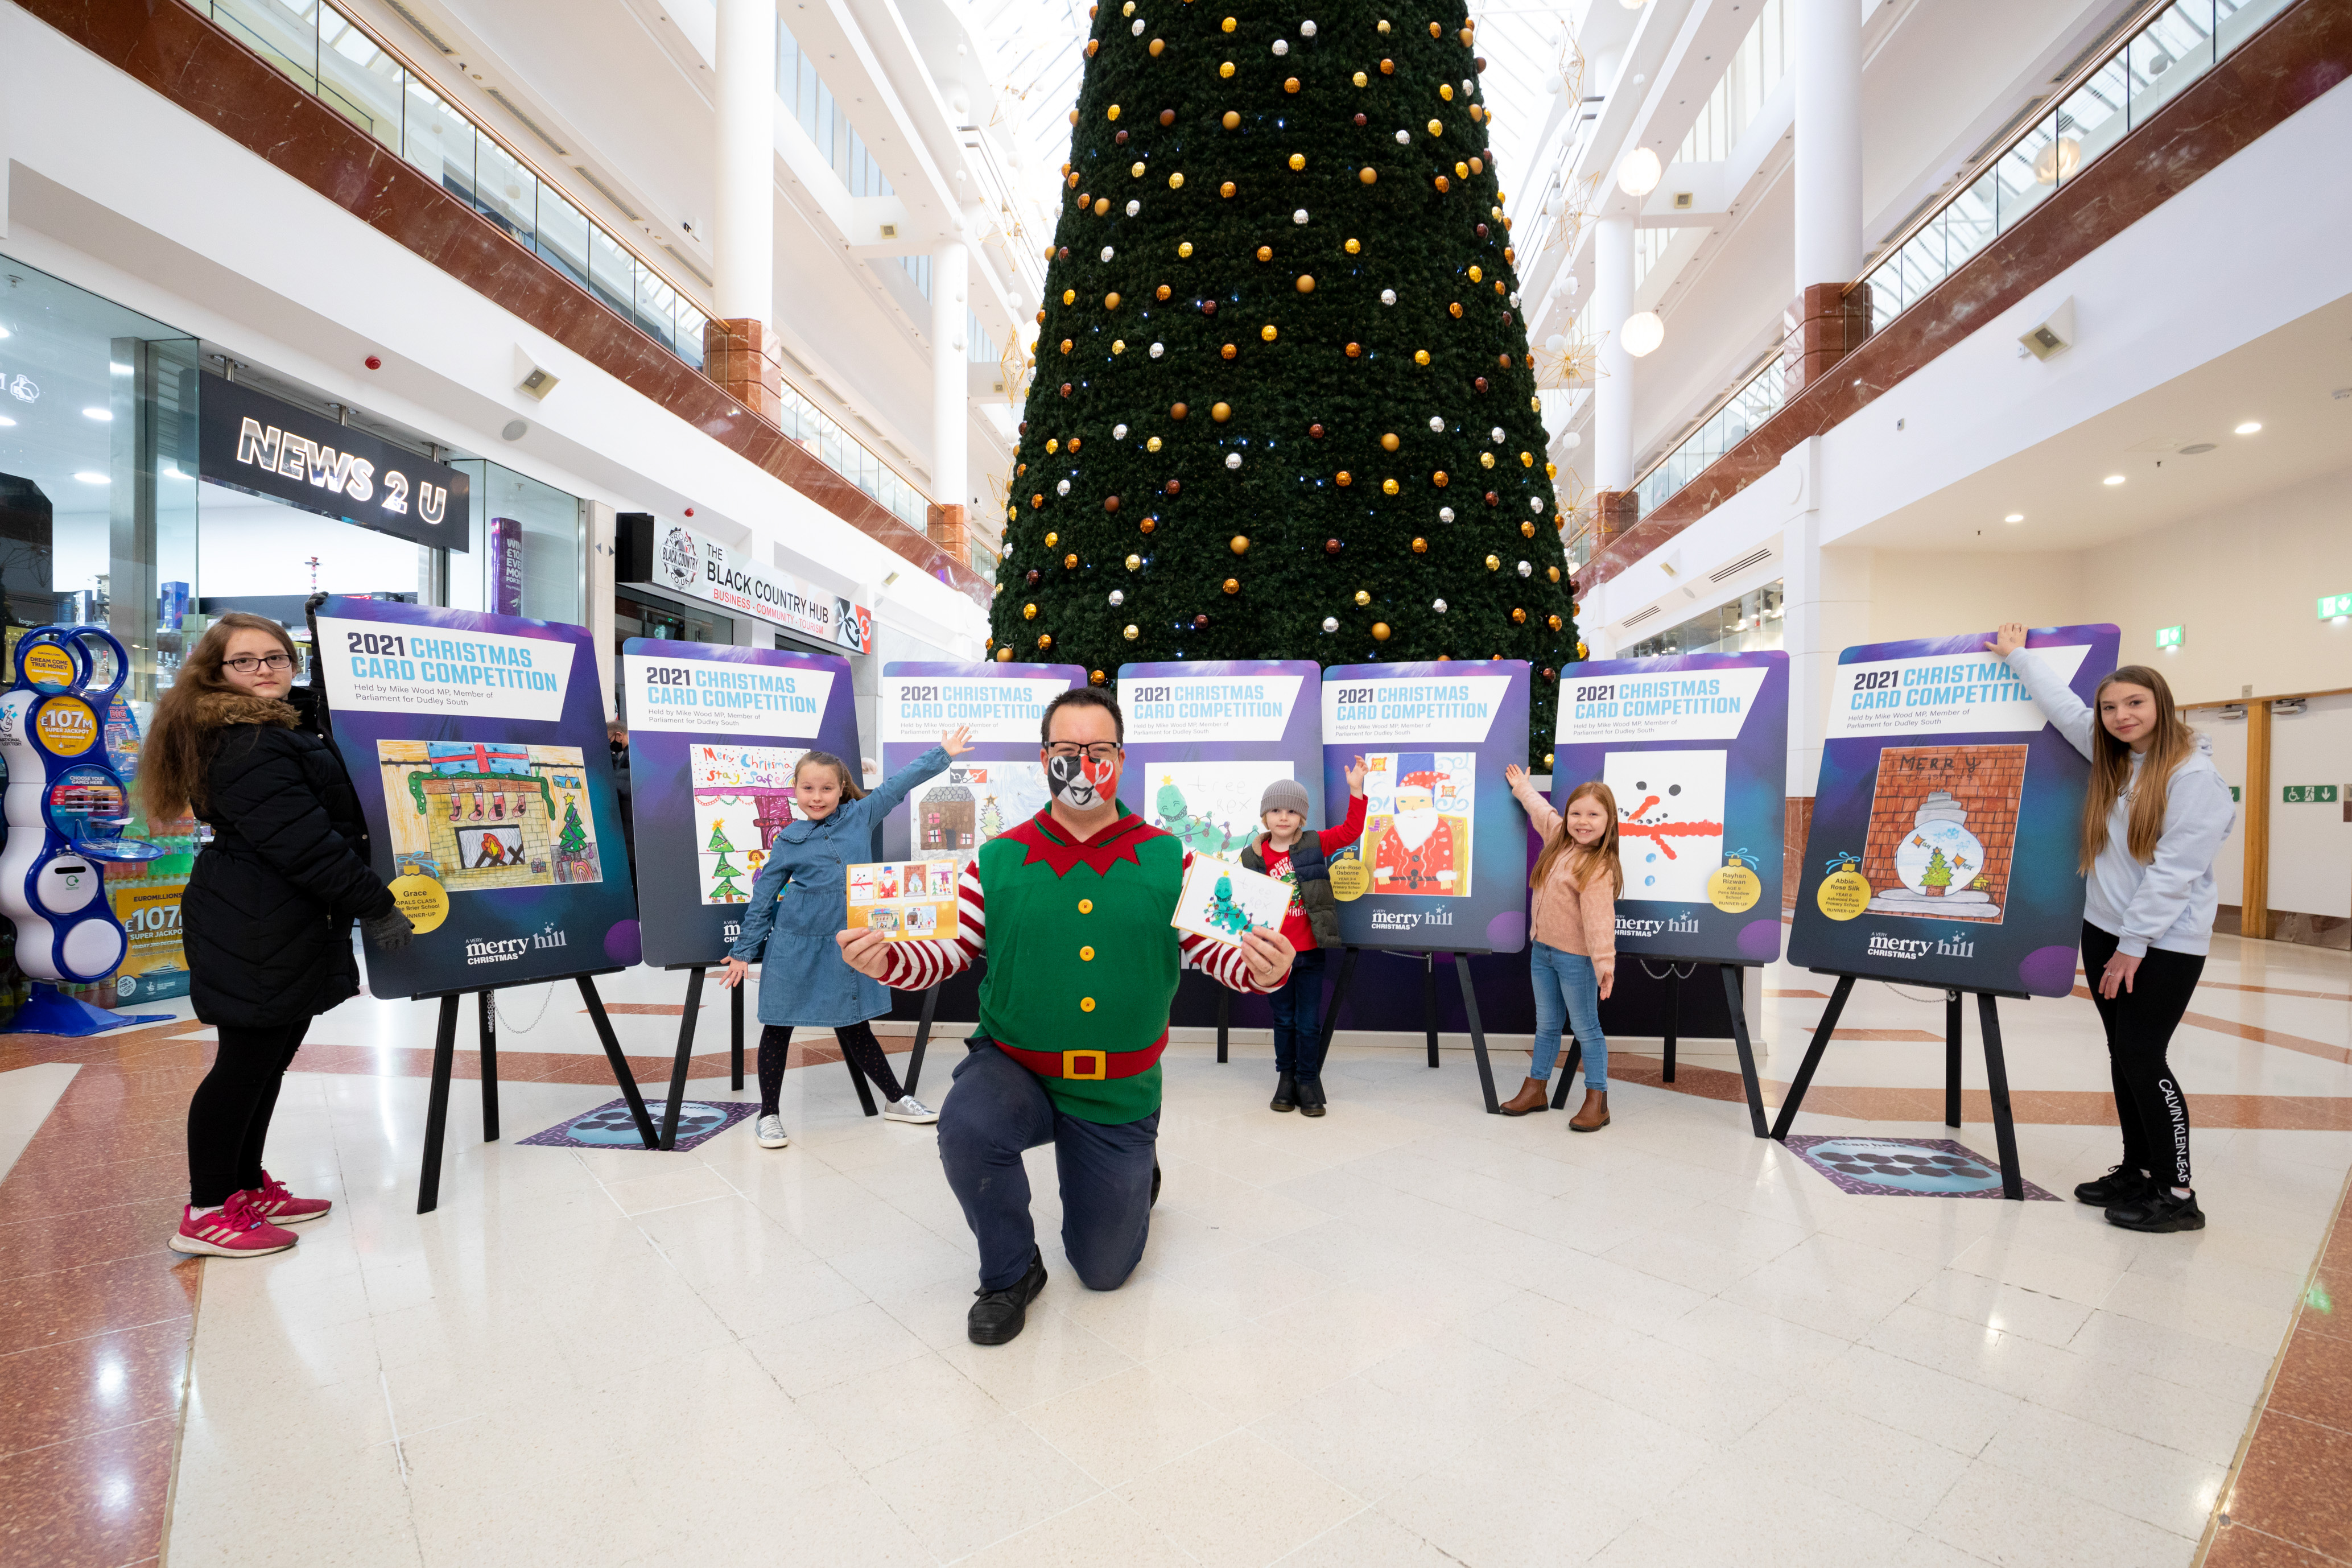 Mike Wood MP with 2021 Christmas card competition winners at Merry Hill